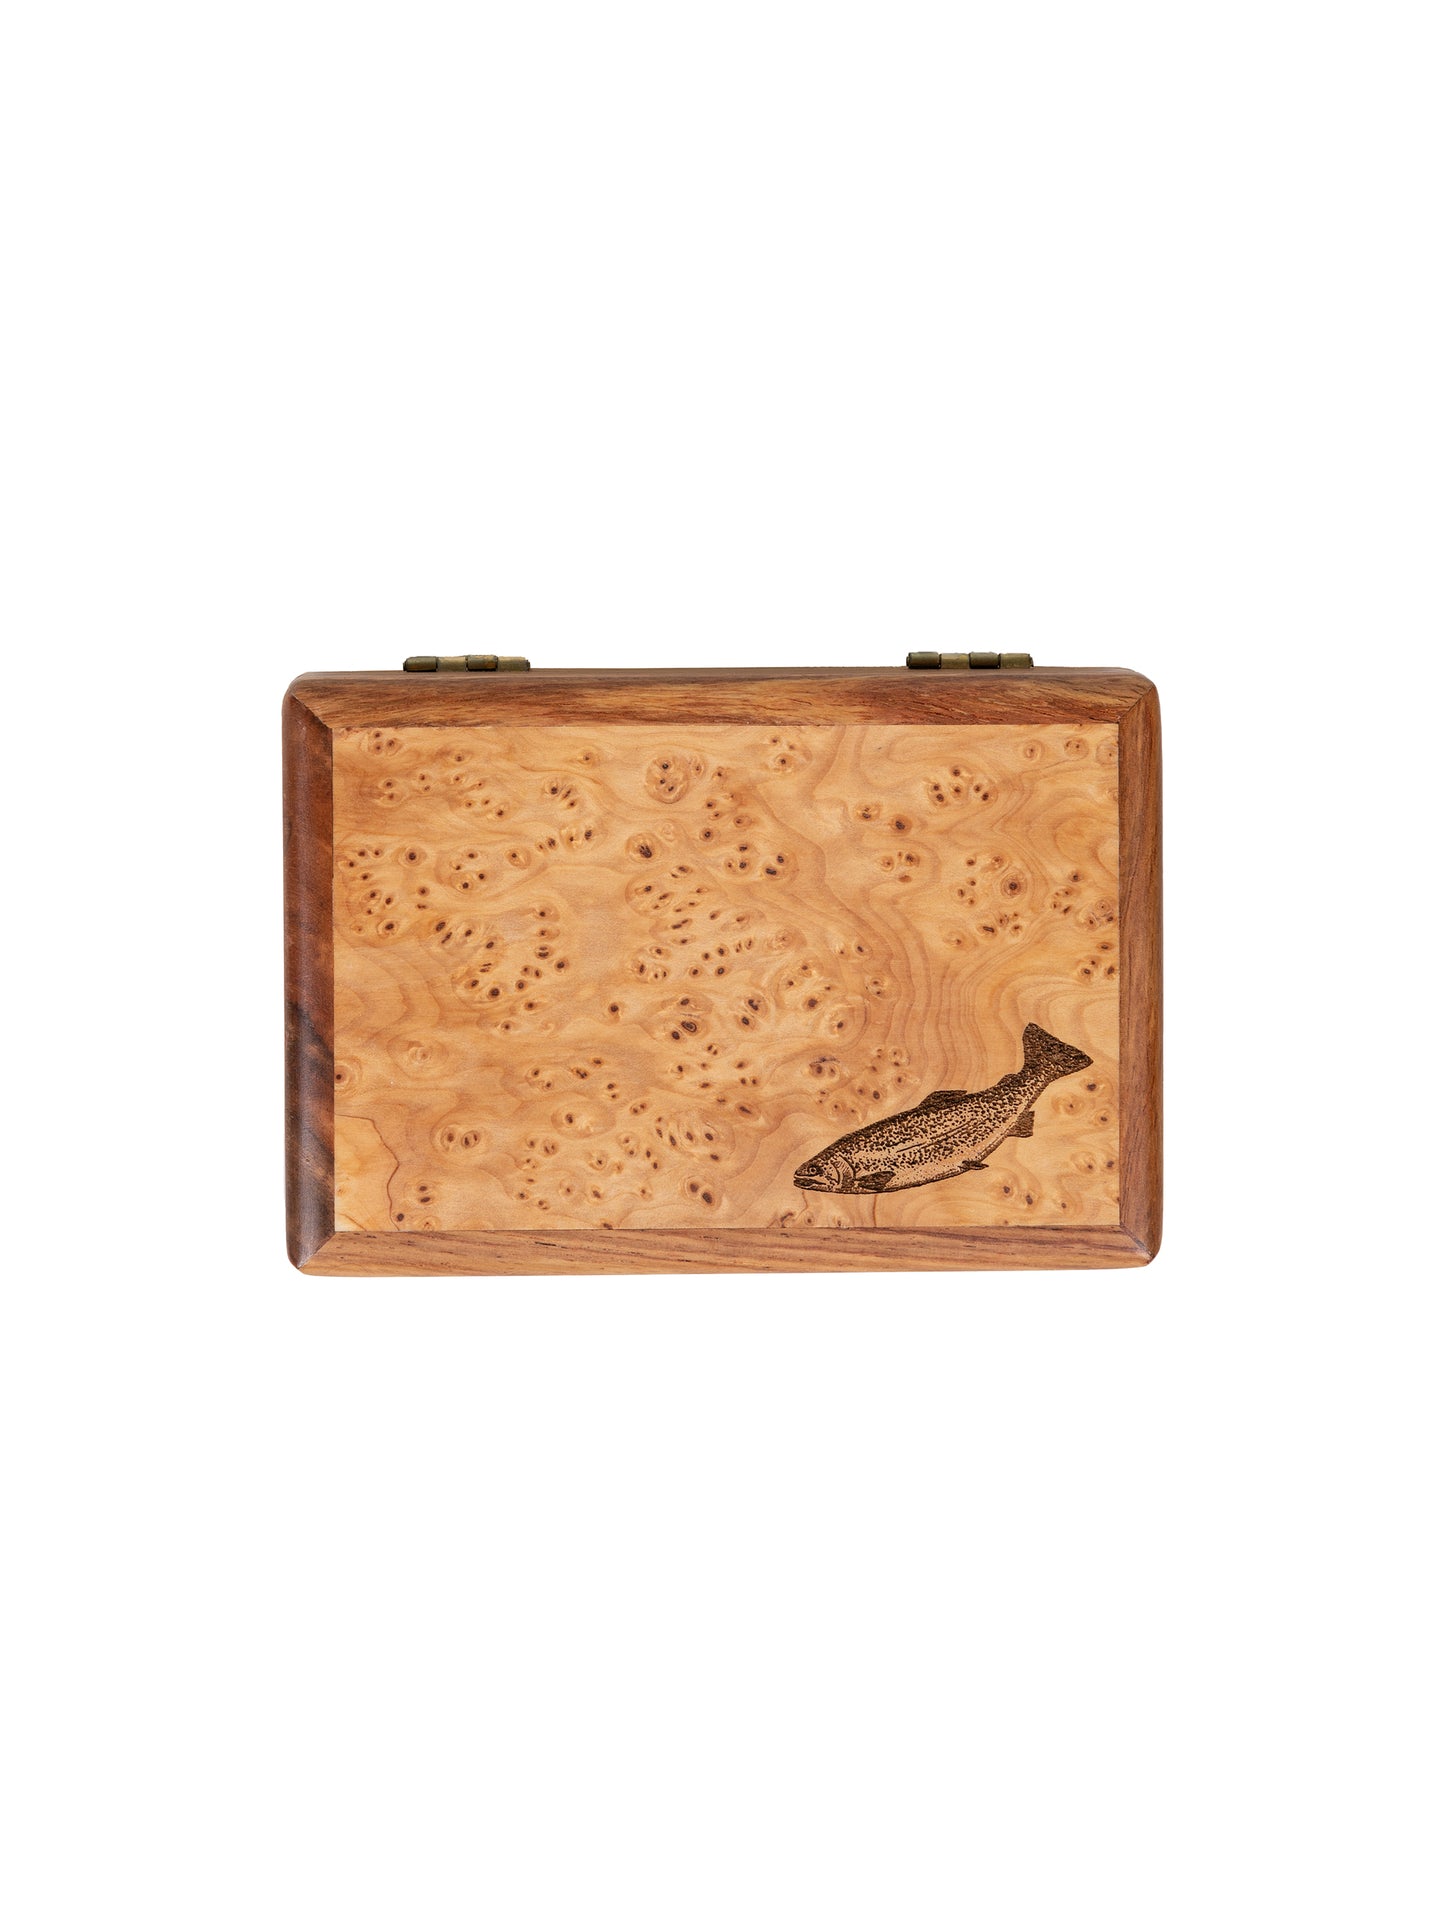 Shop the Burled Wood Fly Fishing Fly Box at Weston Table